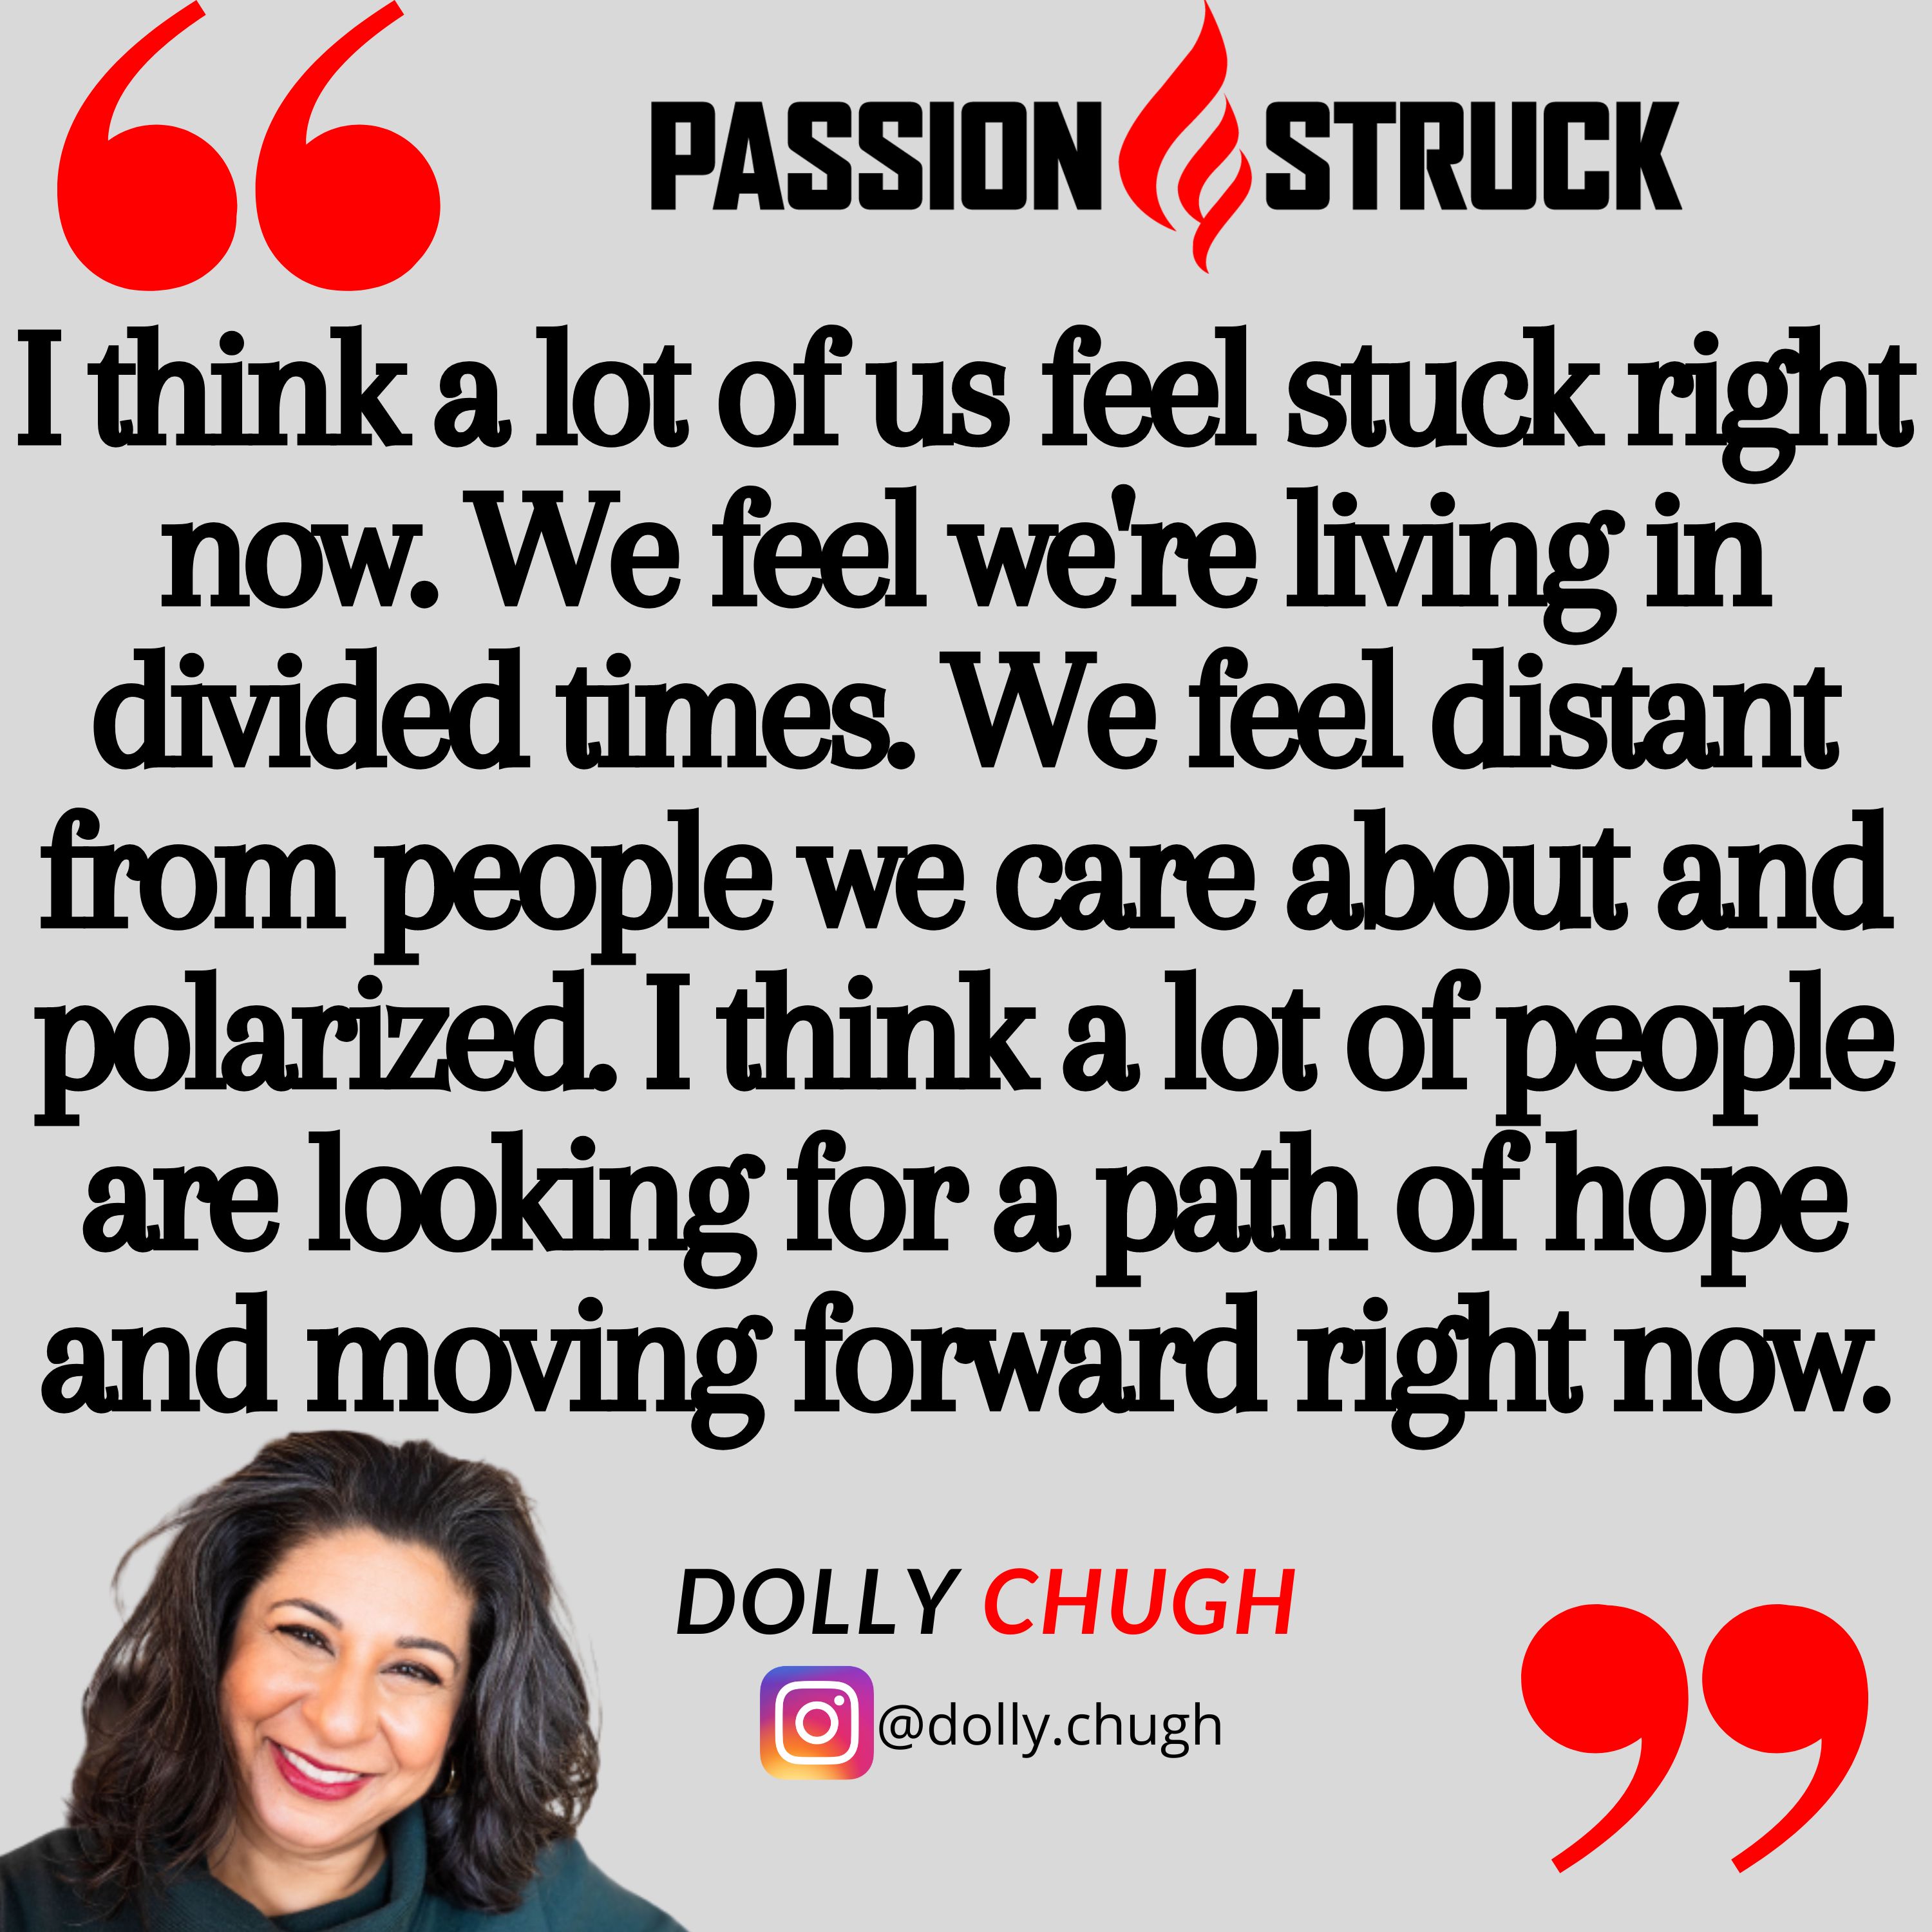 Quote by Dolly Chugh from the Passion Struck podcast:  think a lot of us feel stuck right now. We feel we're living in divided times. We feel distant from people we care about and polarized. I think a lot of people are looking for a path of hope and moving forward right now 